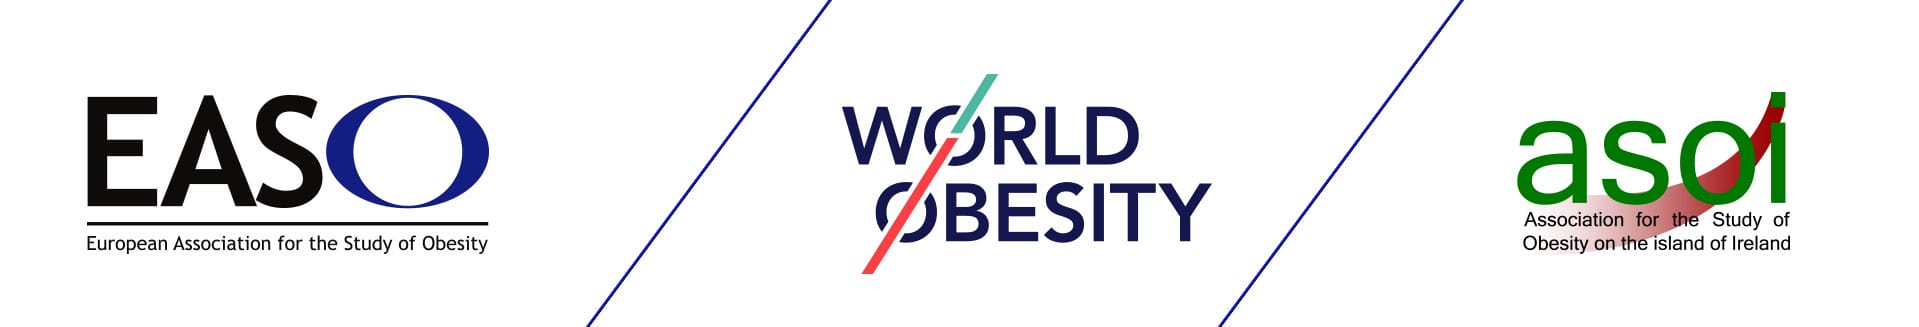 Logos of three obesity-related associations: easo, world obesity, and asod, each stylized with distinctive fonts and colors.